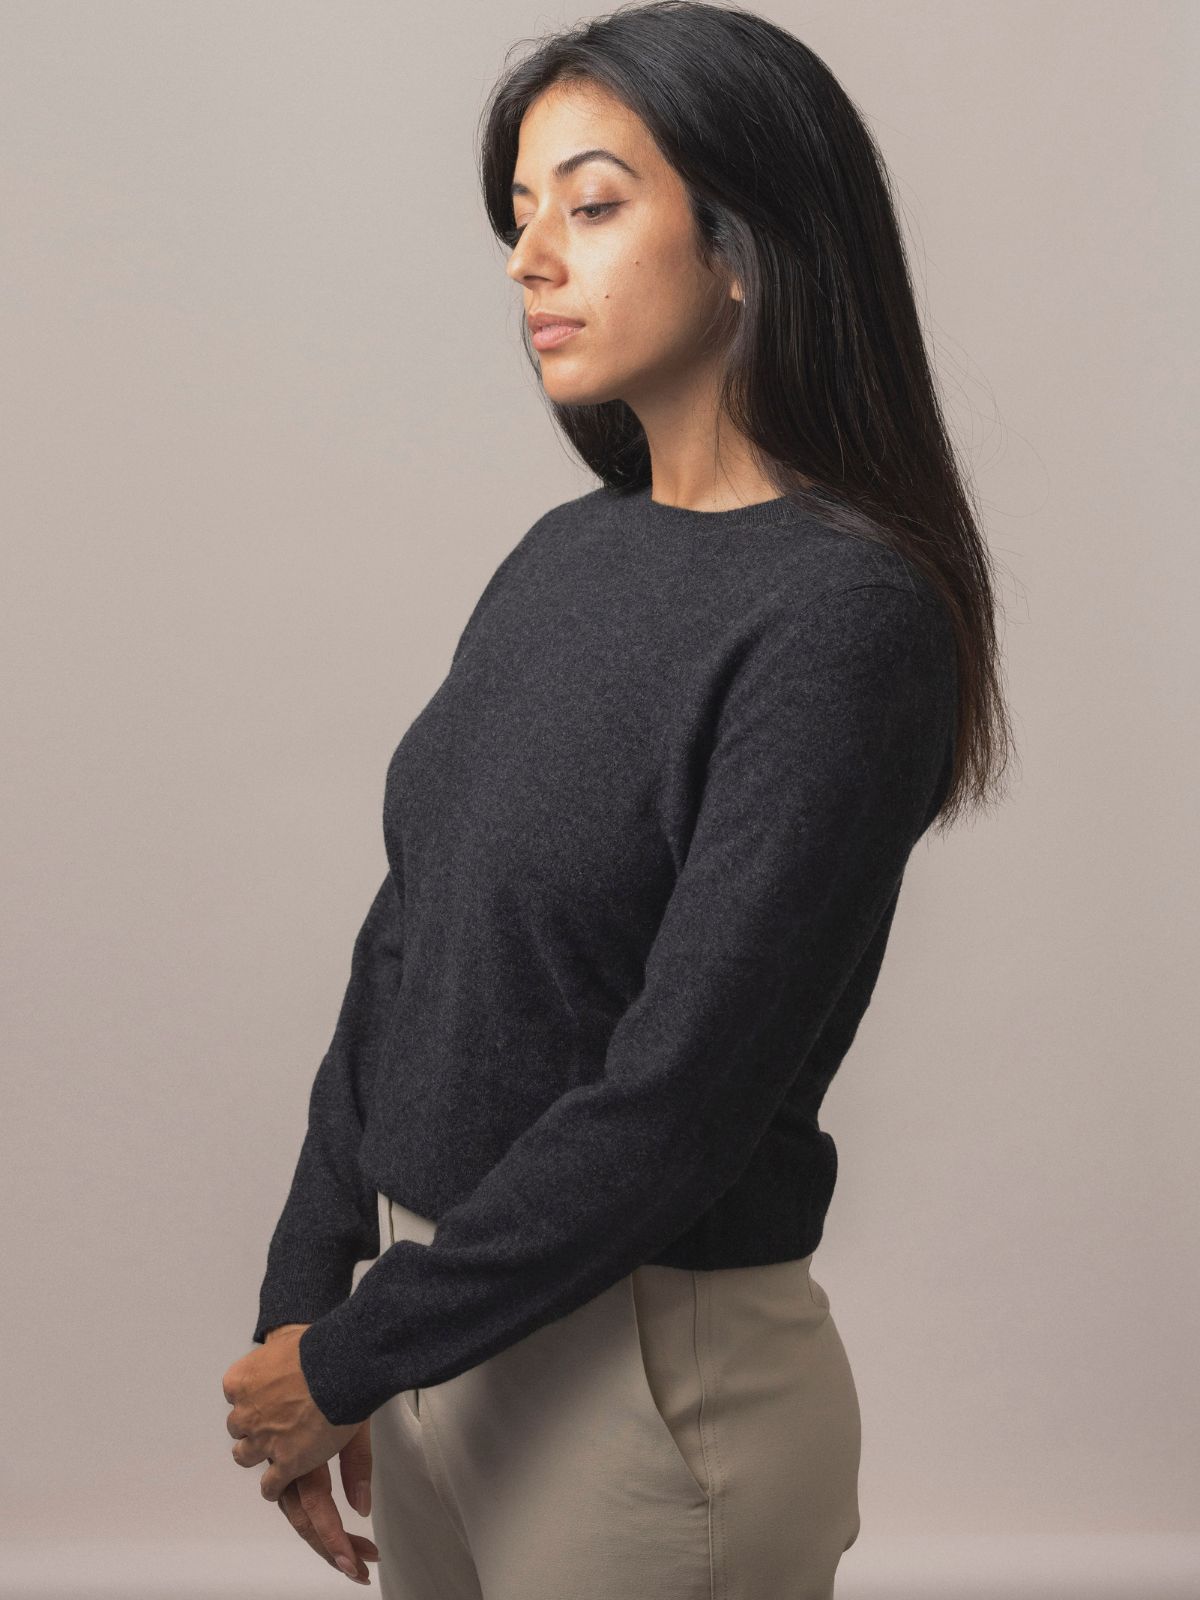 Visitor_Clothing_Women_Cashmere_Airspun_Sweater_Charcoal_02